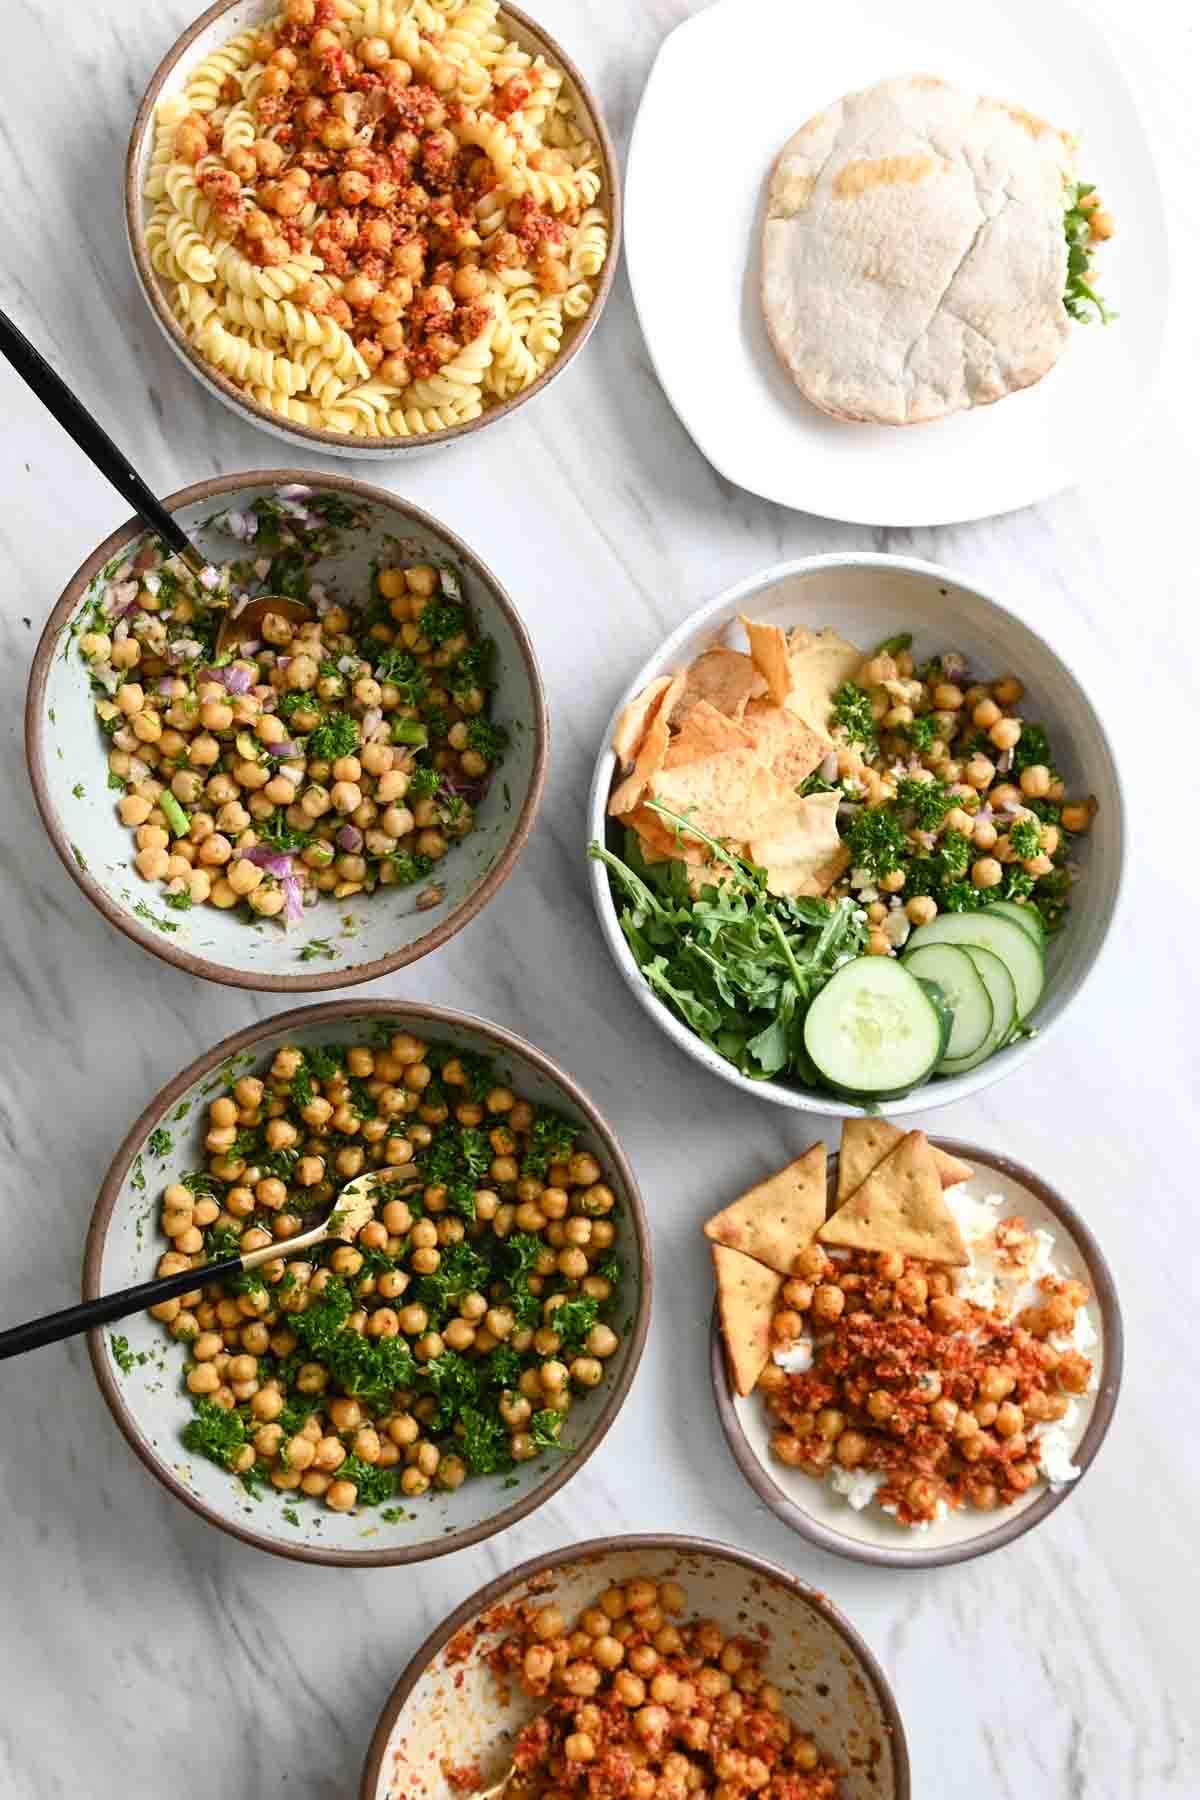 Six bowls and one plate filled with chickpeas, salads, and wraps.